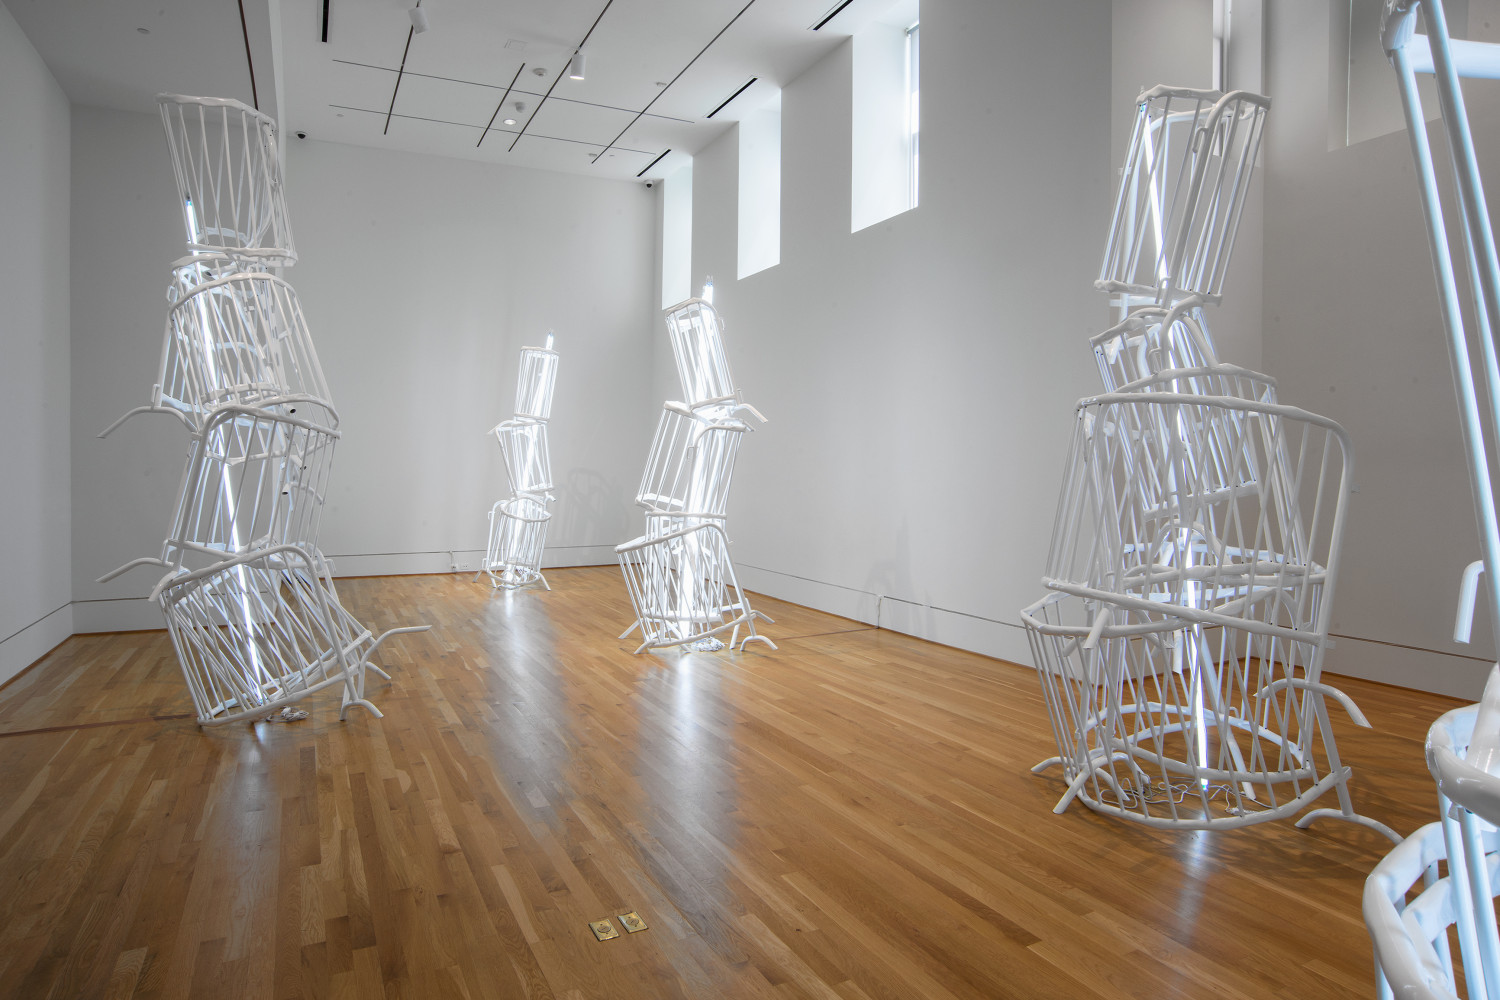 Bettina Pousttchi, ‘The Phillips Collection, Washington D.C.’, Installation view, 2016